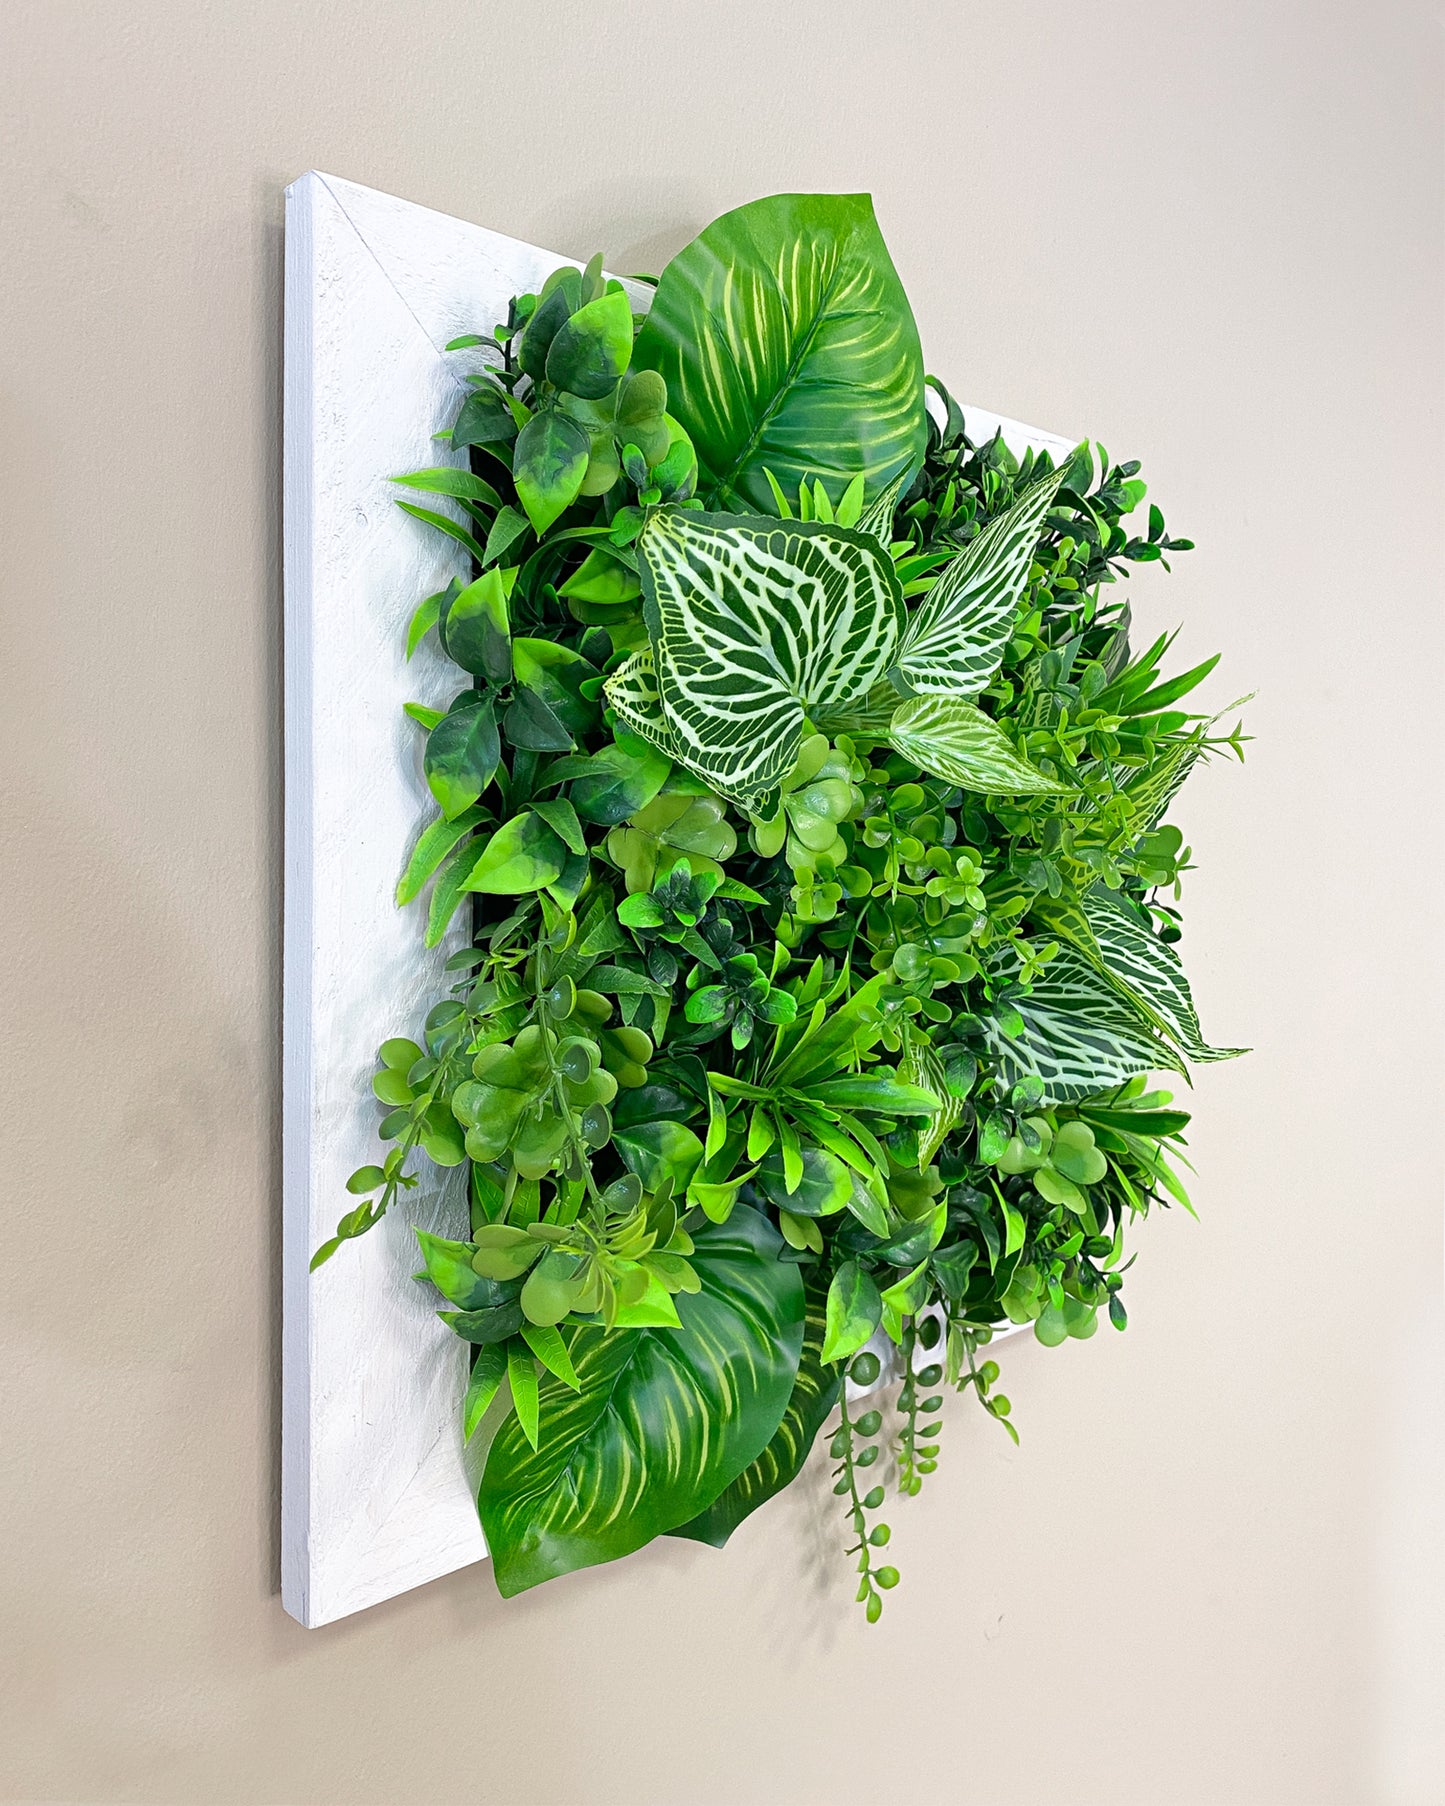 Tiny Frame "PARANA" made of Realtouch artificial plants with a spruce frame